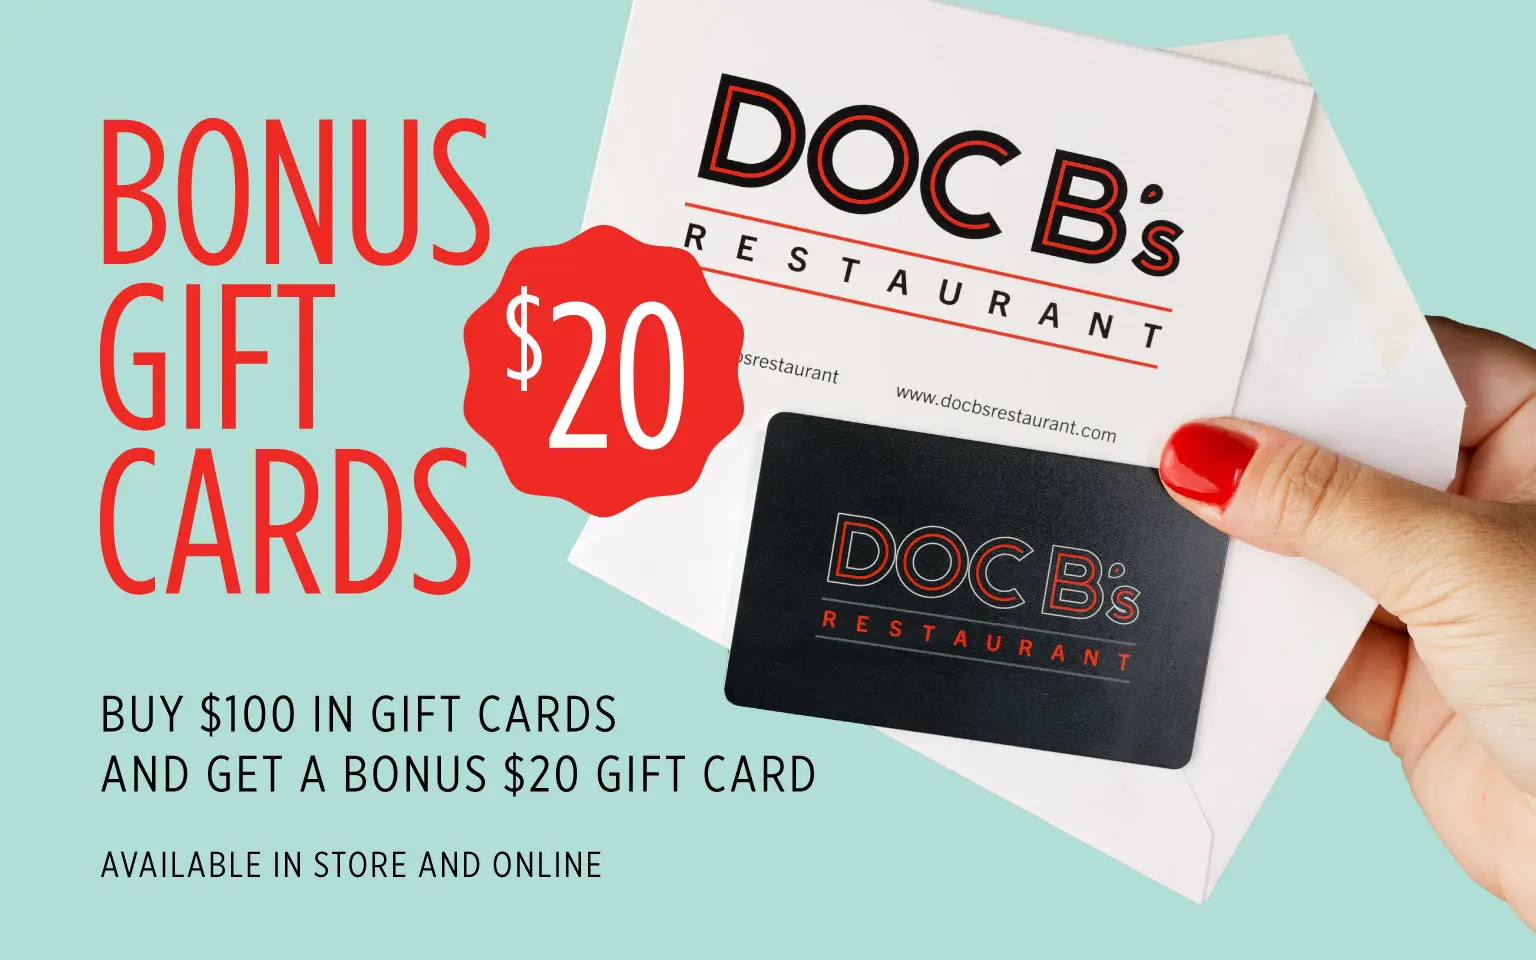 Bonus $20 for every $100 in gift card purchases